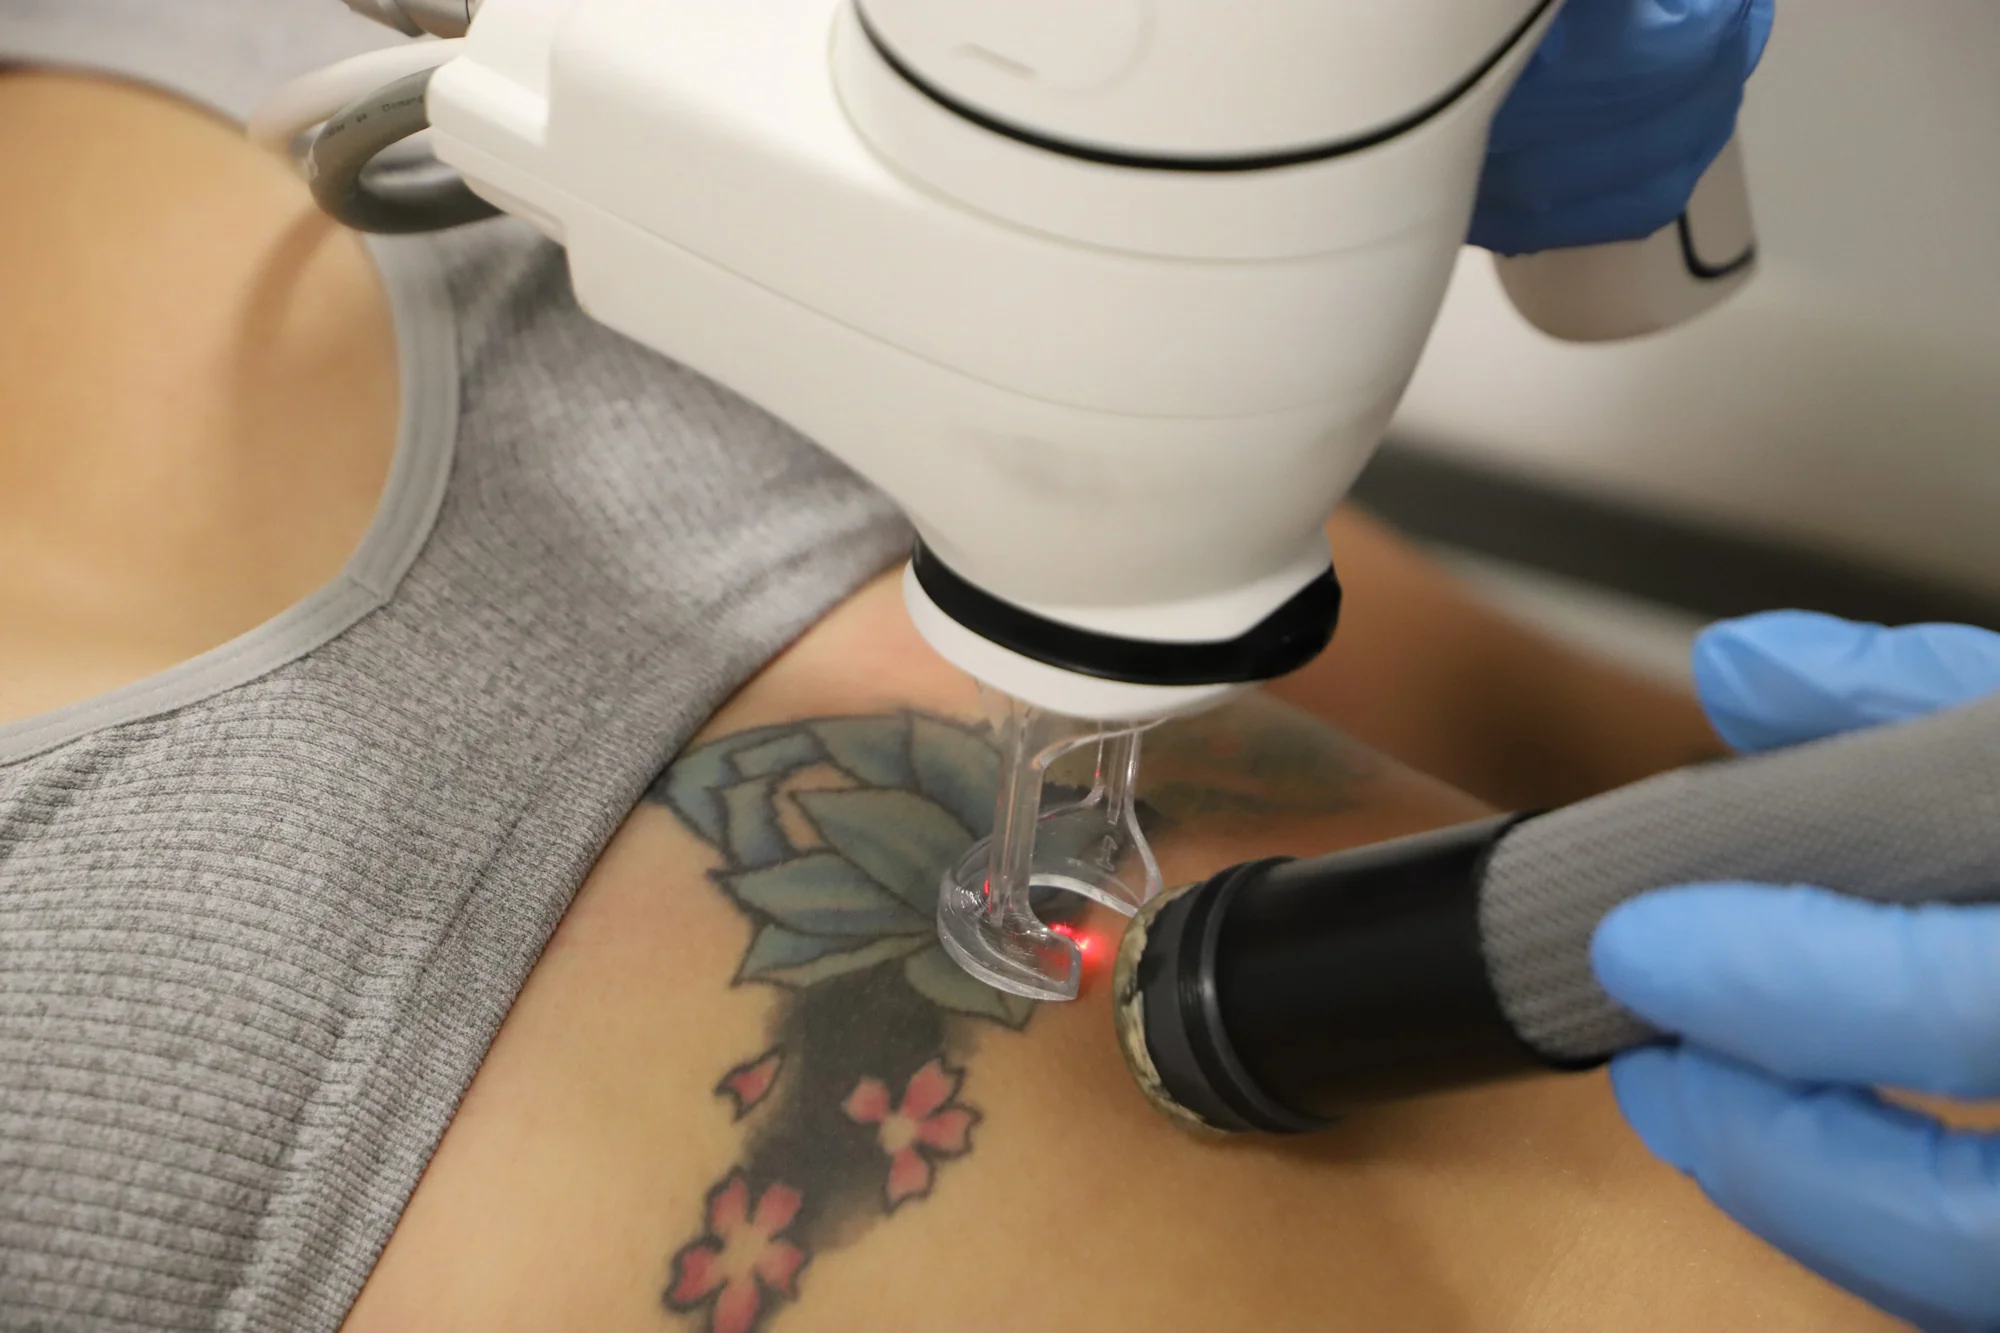 Efficient removal of unwanted tattoos using advanced lasers